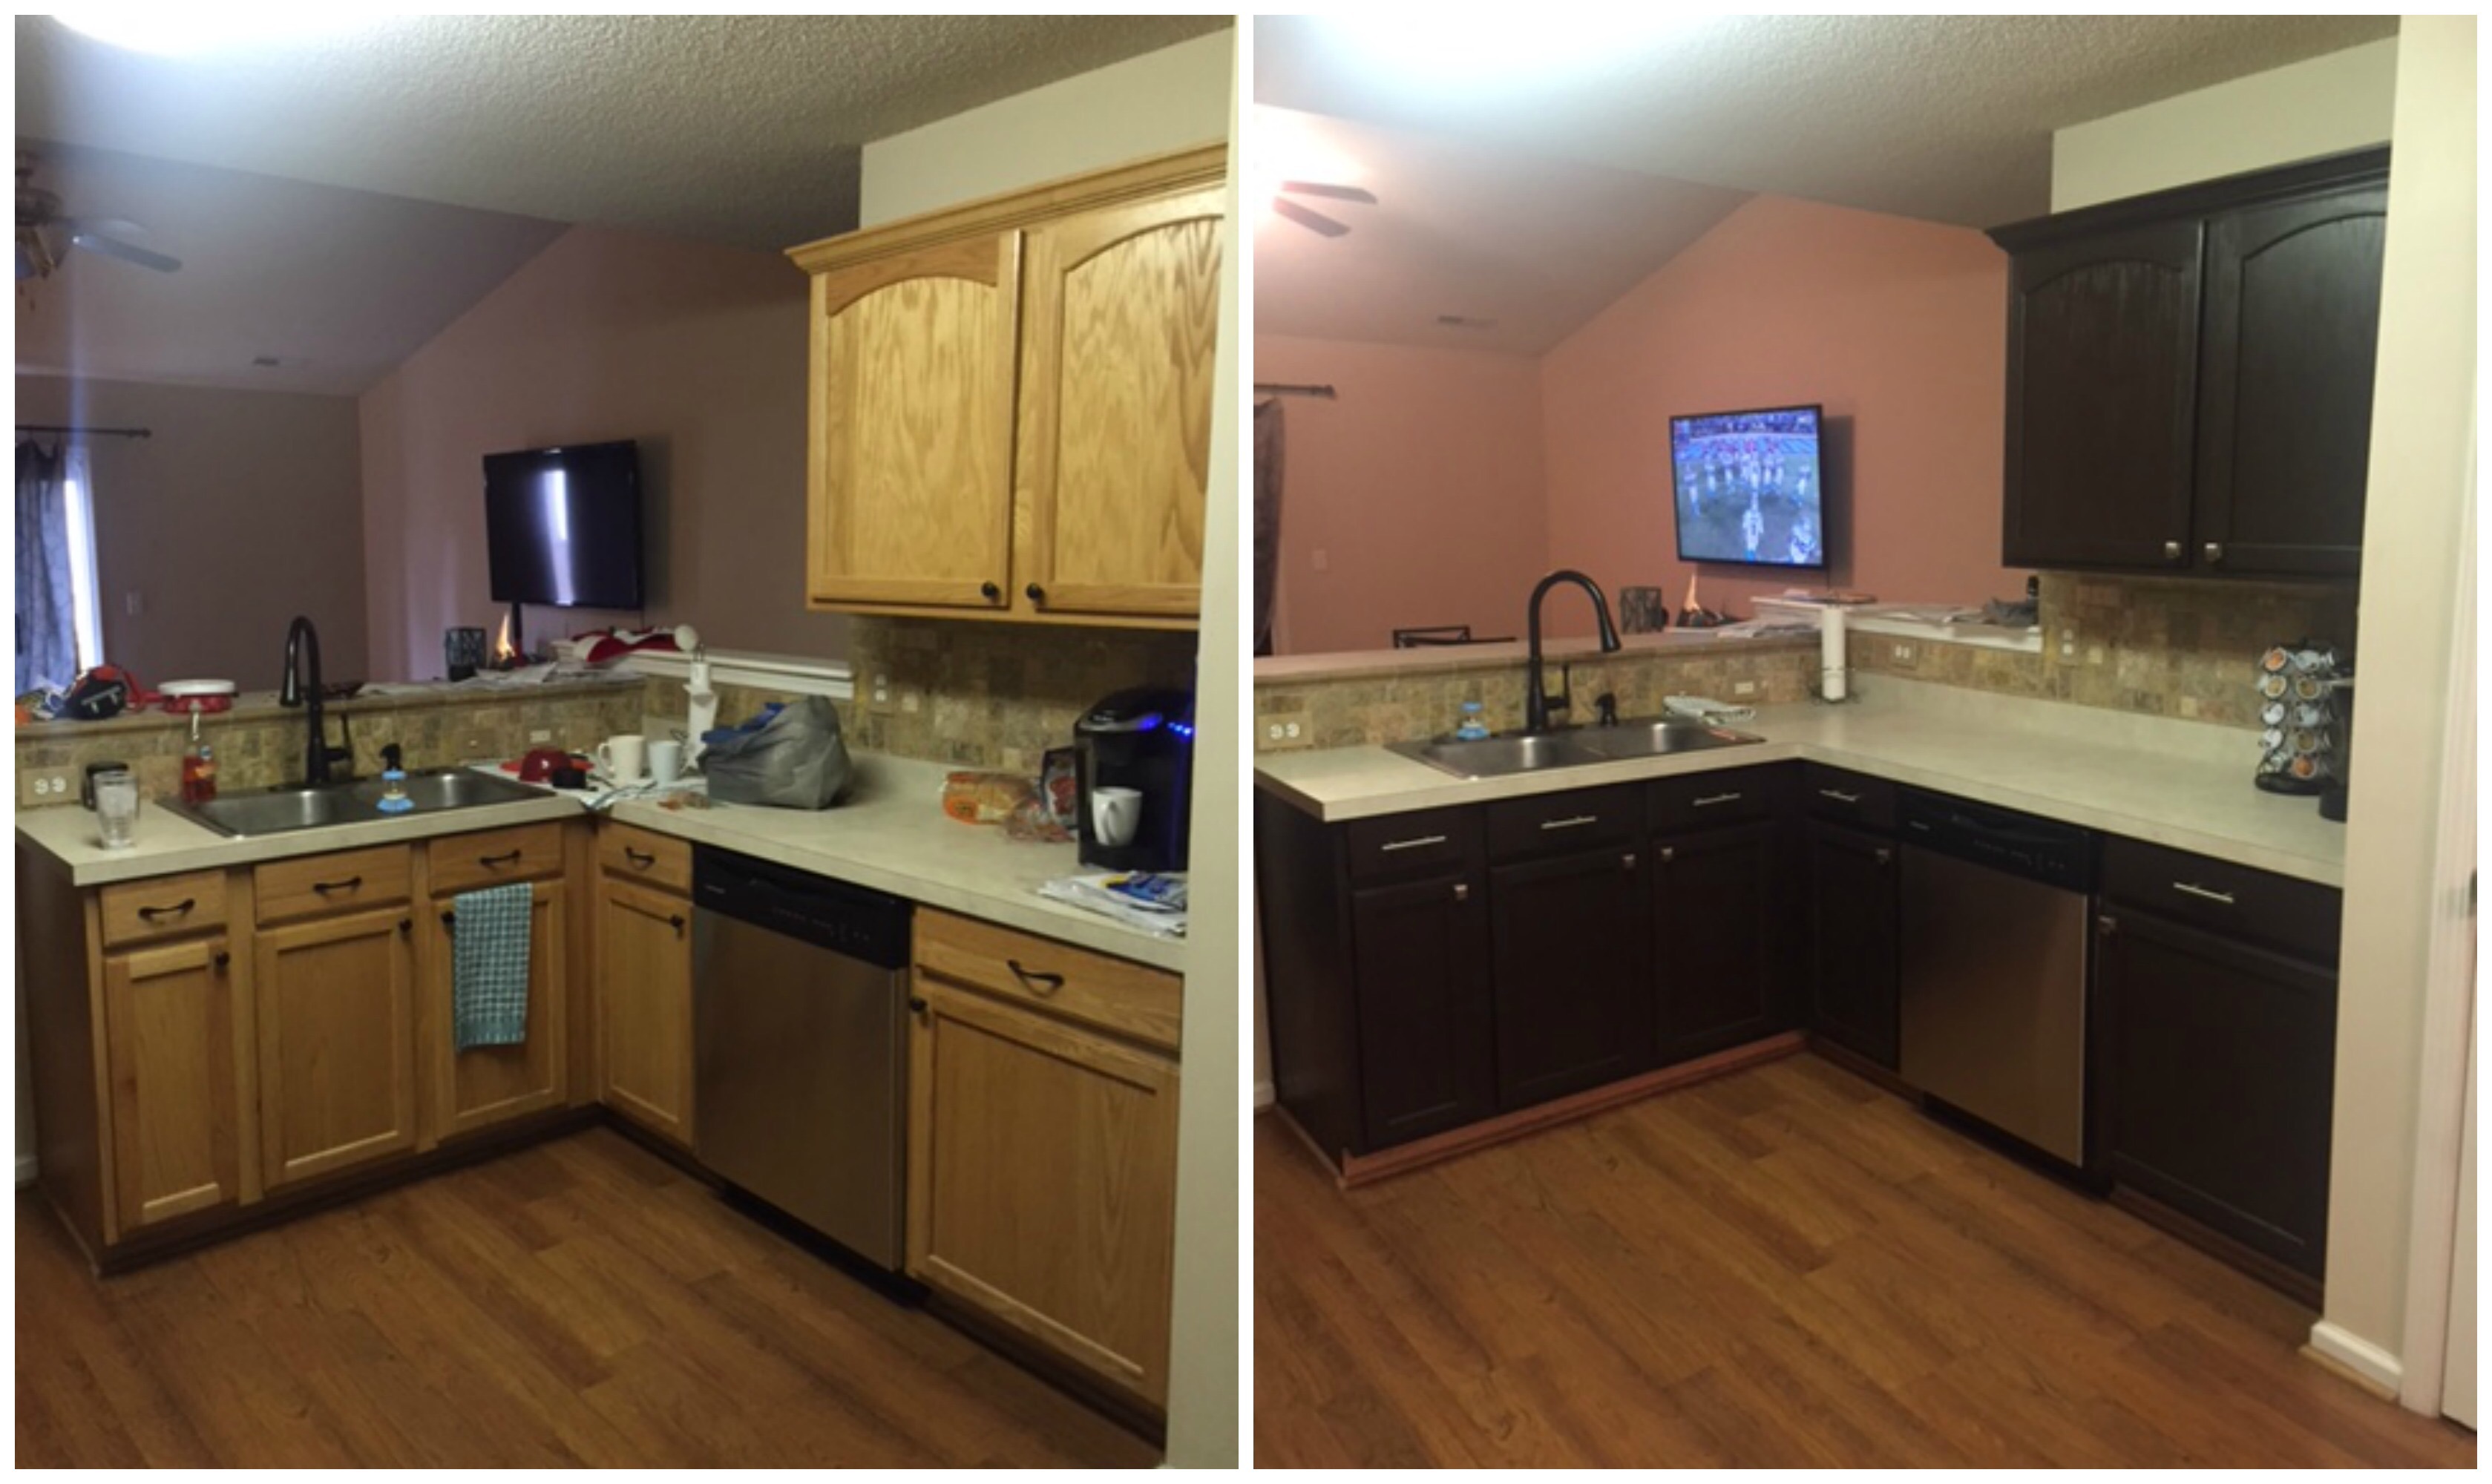 Diy Painting Kitchen Cabinets Before And After Pics